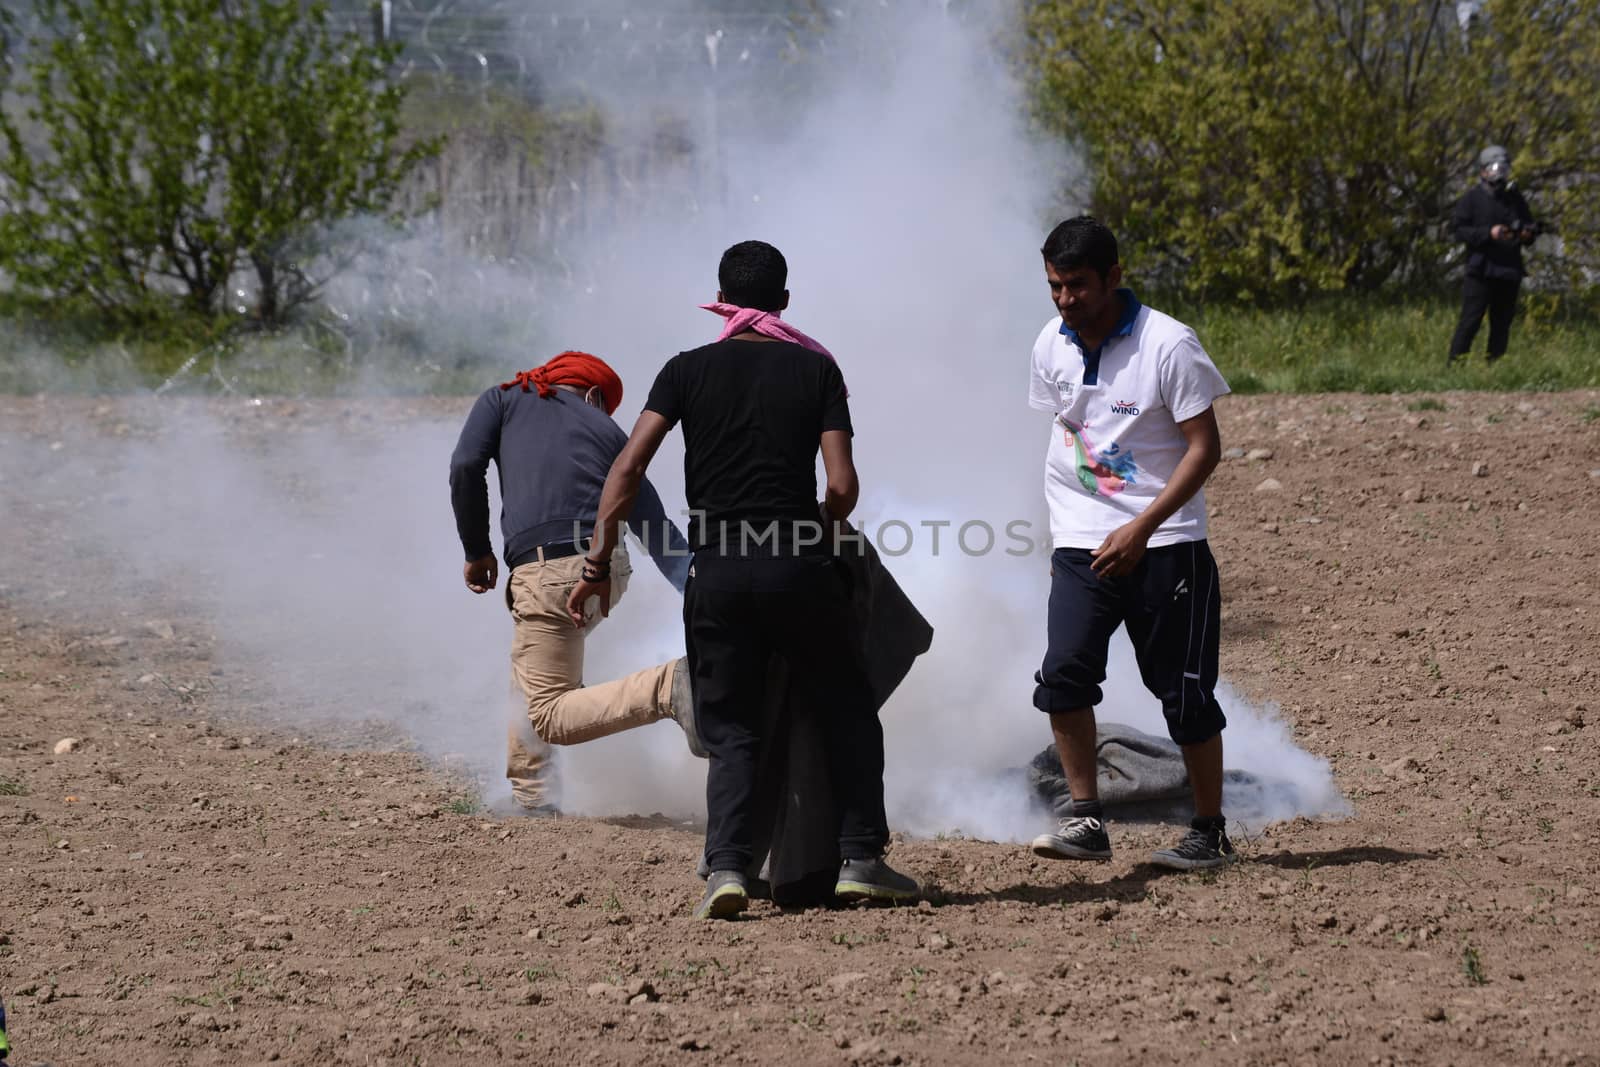 GREECE, Idomeni: A man throws back to macedonian police a tear gas shell as migrants and refugees tried to break down the border fence near their makeshift camp at the Greek-Macedonian border near Idomeni village, on April 13, 2016. About 100 migrants spread out over about 100 metres (yards) tugging at the wire fence, but swiftly pulled back when two squads of Greek riot police moved in, the reporter said. The Greek riot police positioned themselves between the migrants and the Macedonian fence, ending the incident.